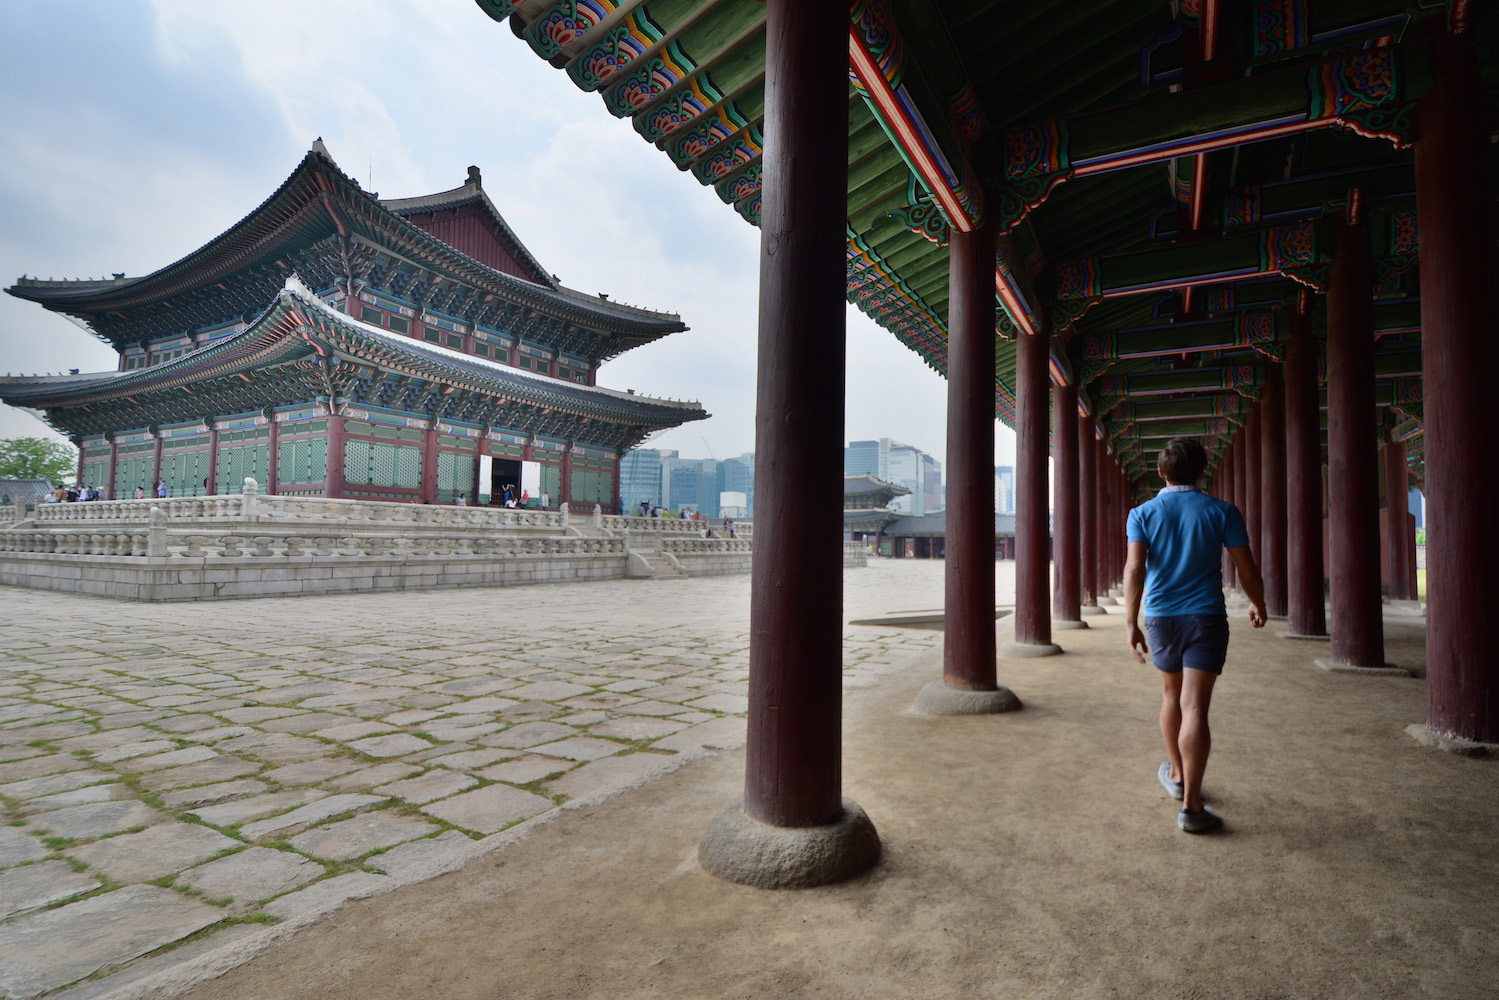 Seoul's Gyeongbokgung Palace during the day time